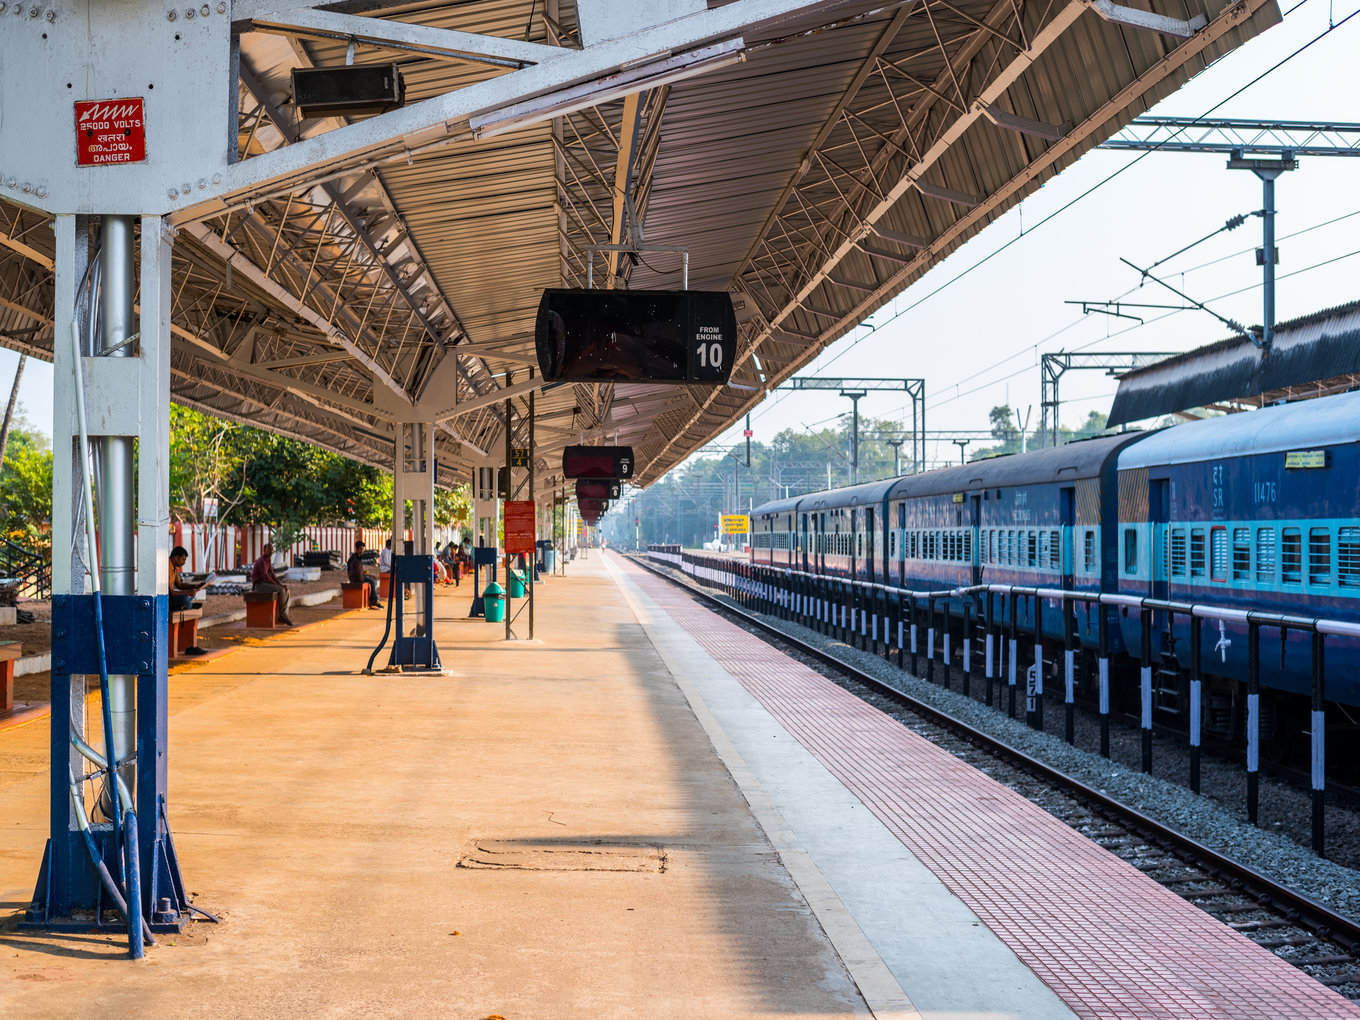 Indian Railways May Soon Tie Up With Ecommerce Companies To Boost Parcel Business